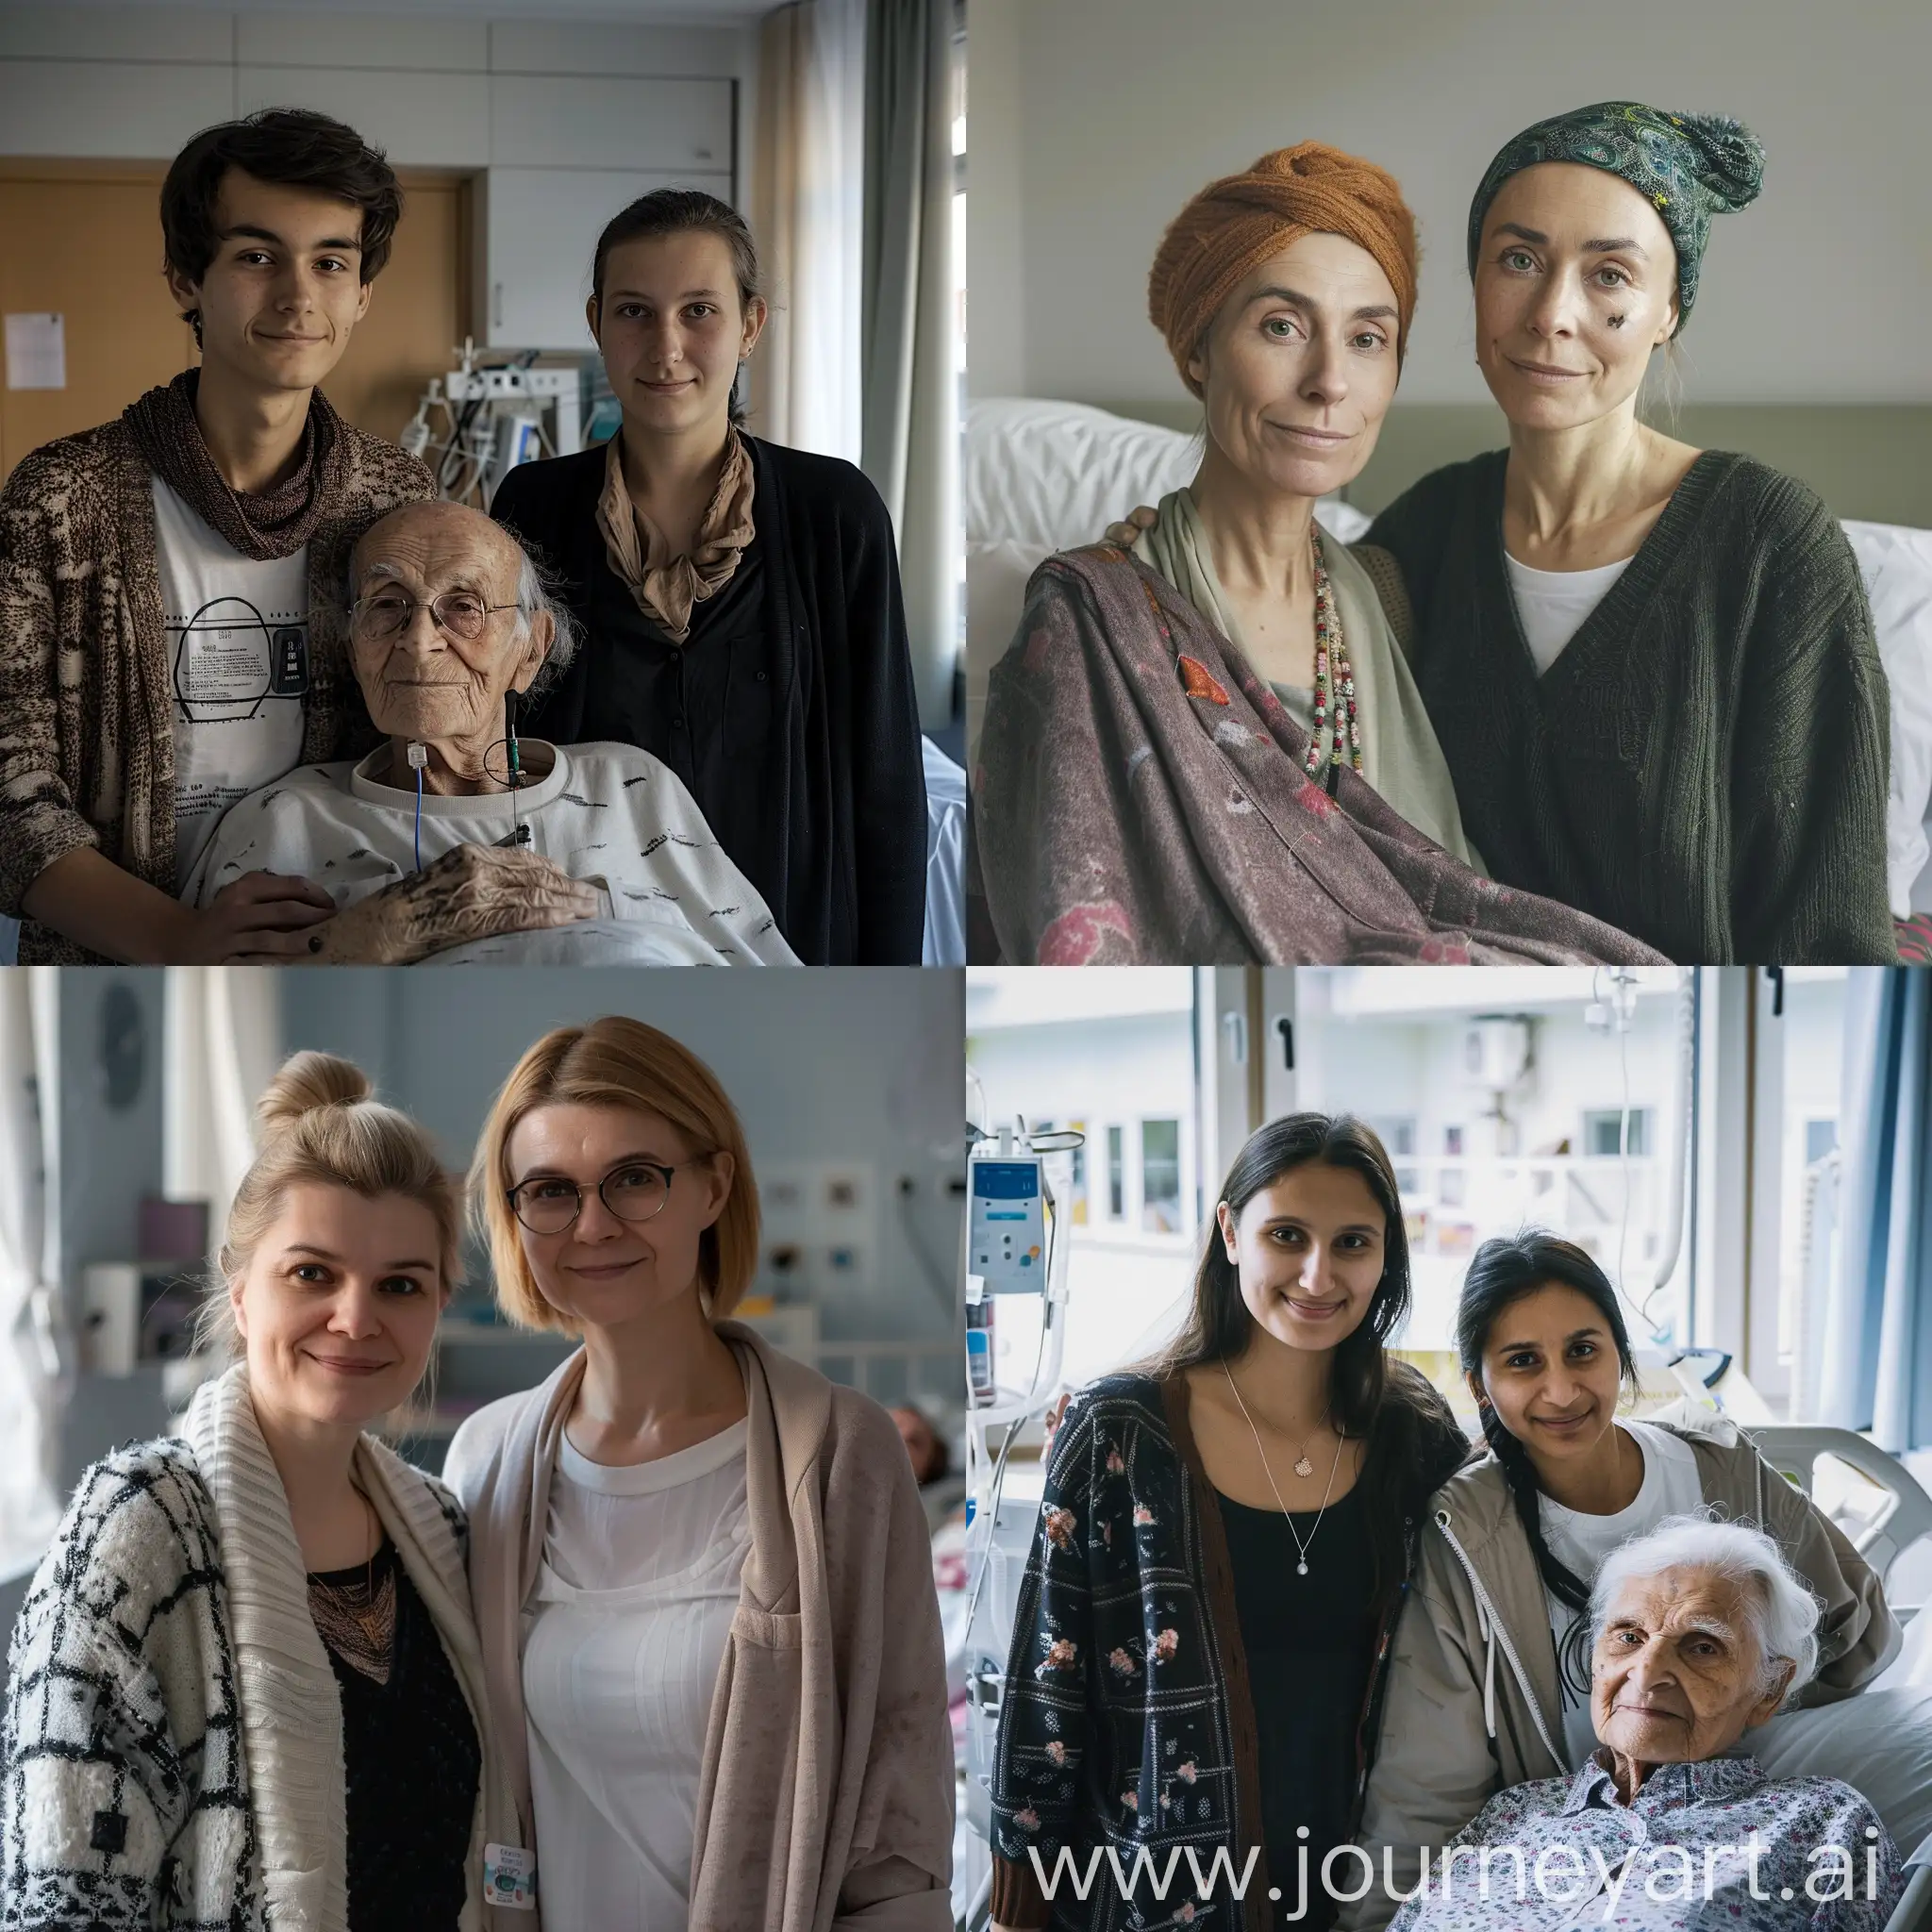 I want a photo of a person who visits people with cancer and helps them, but the photo should be like me, for example, and very natural. This image should attract the attention of people supporting social projects. May this photo be such that a person is standing next to cancer patients